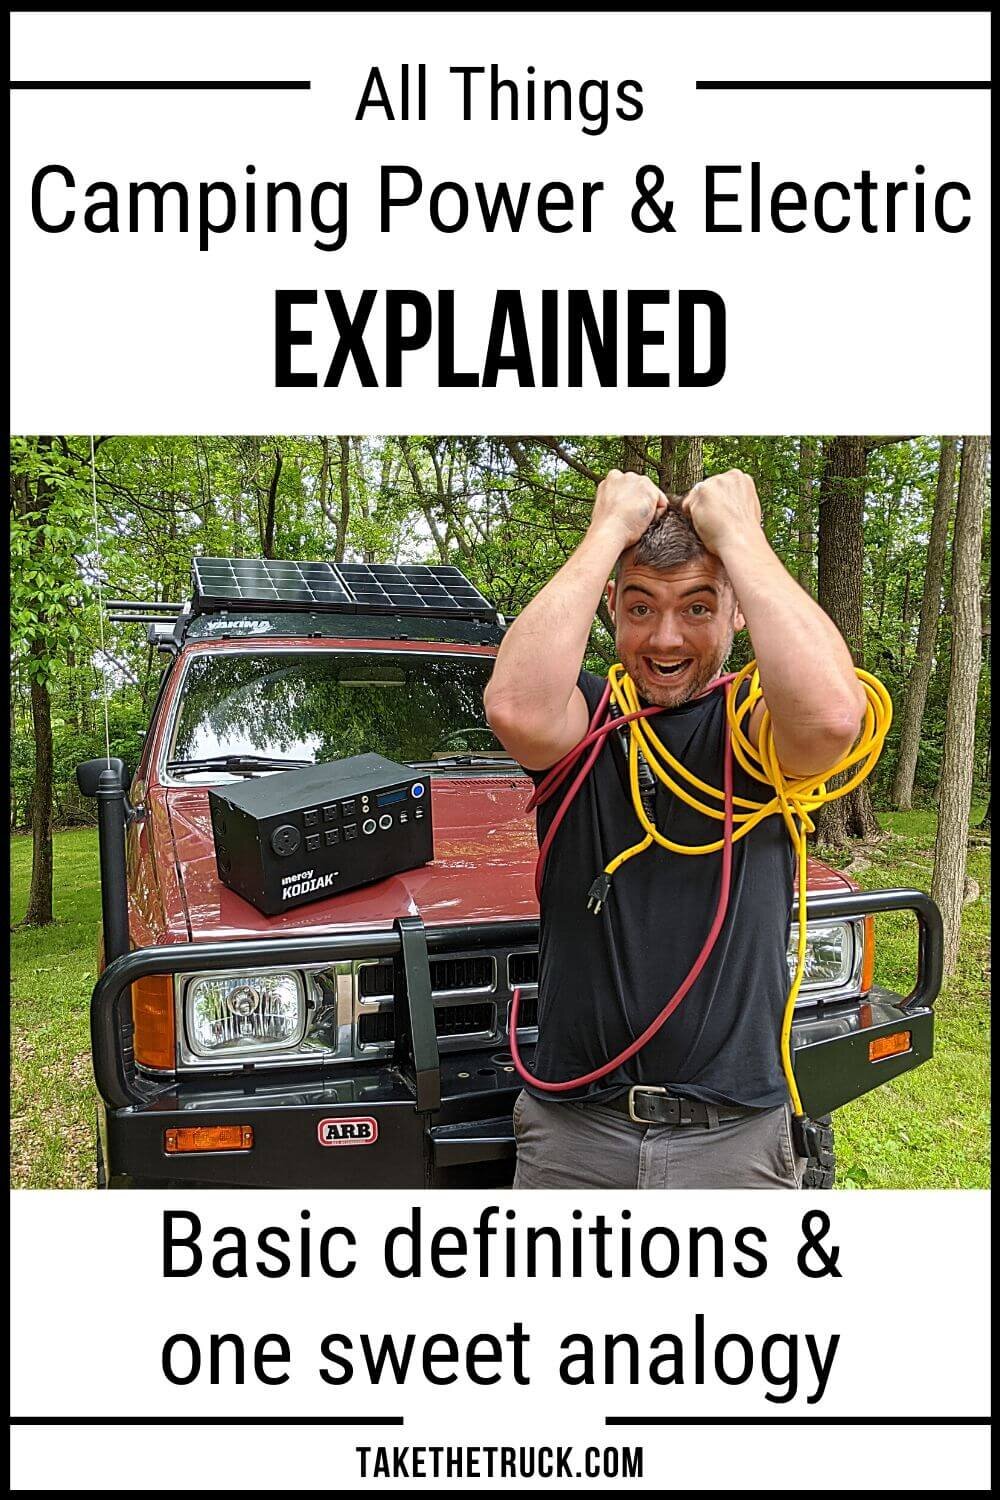 Camping power and electrical terms made easy to understand and apply to your van build, truck bed camper, or other camper (watt hours, amps, watts, amp hours, volts, AC and DC power).